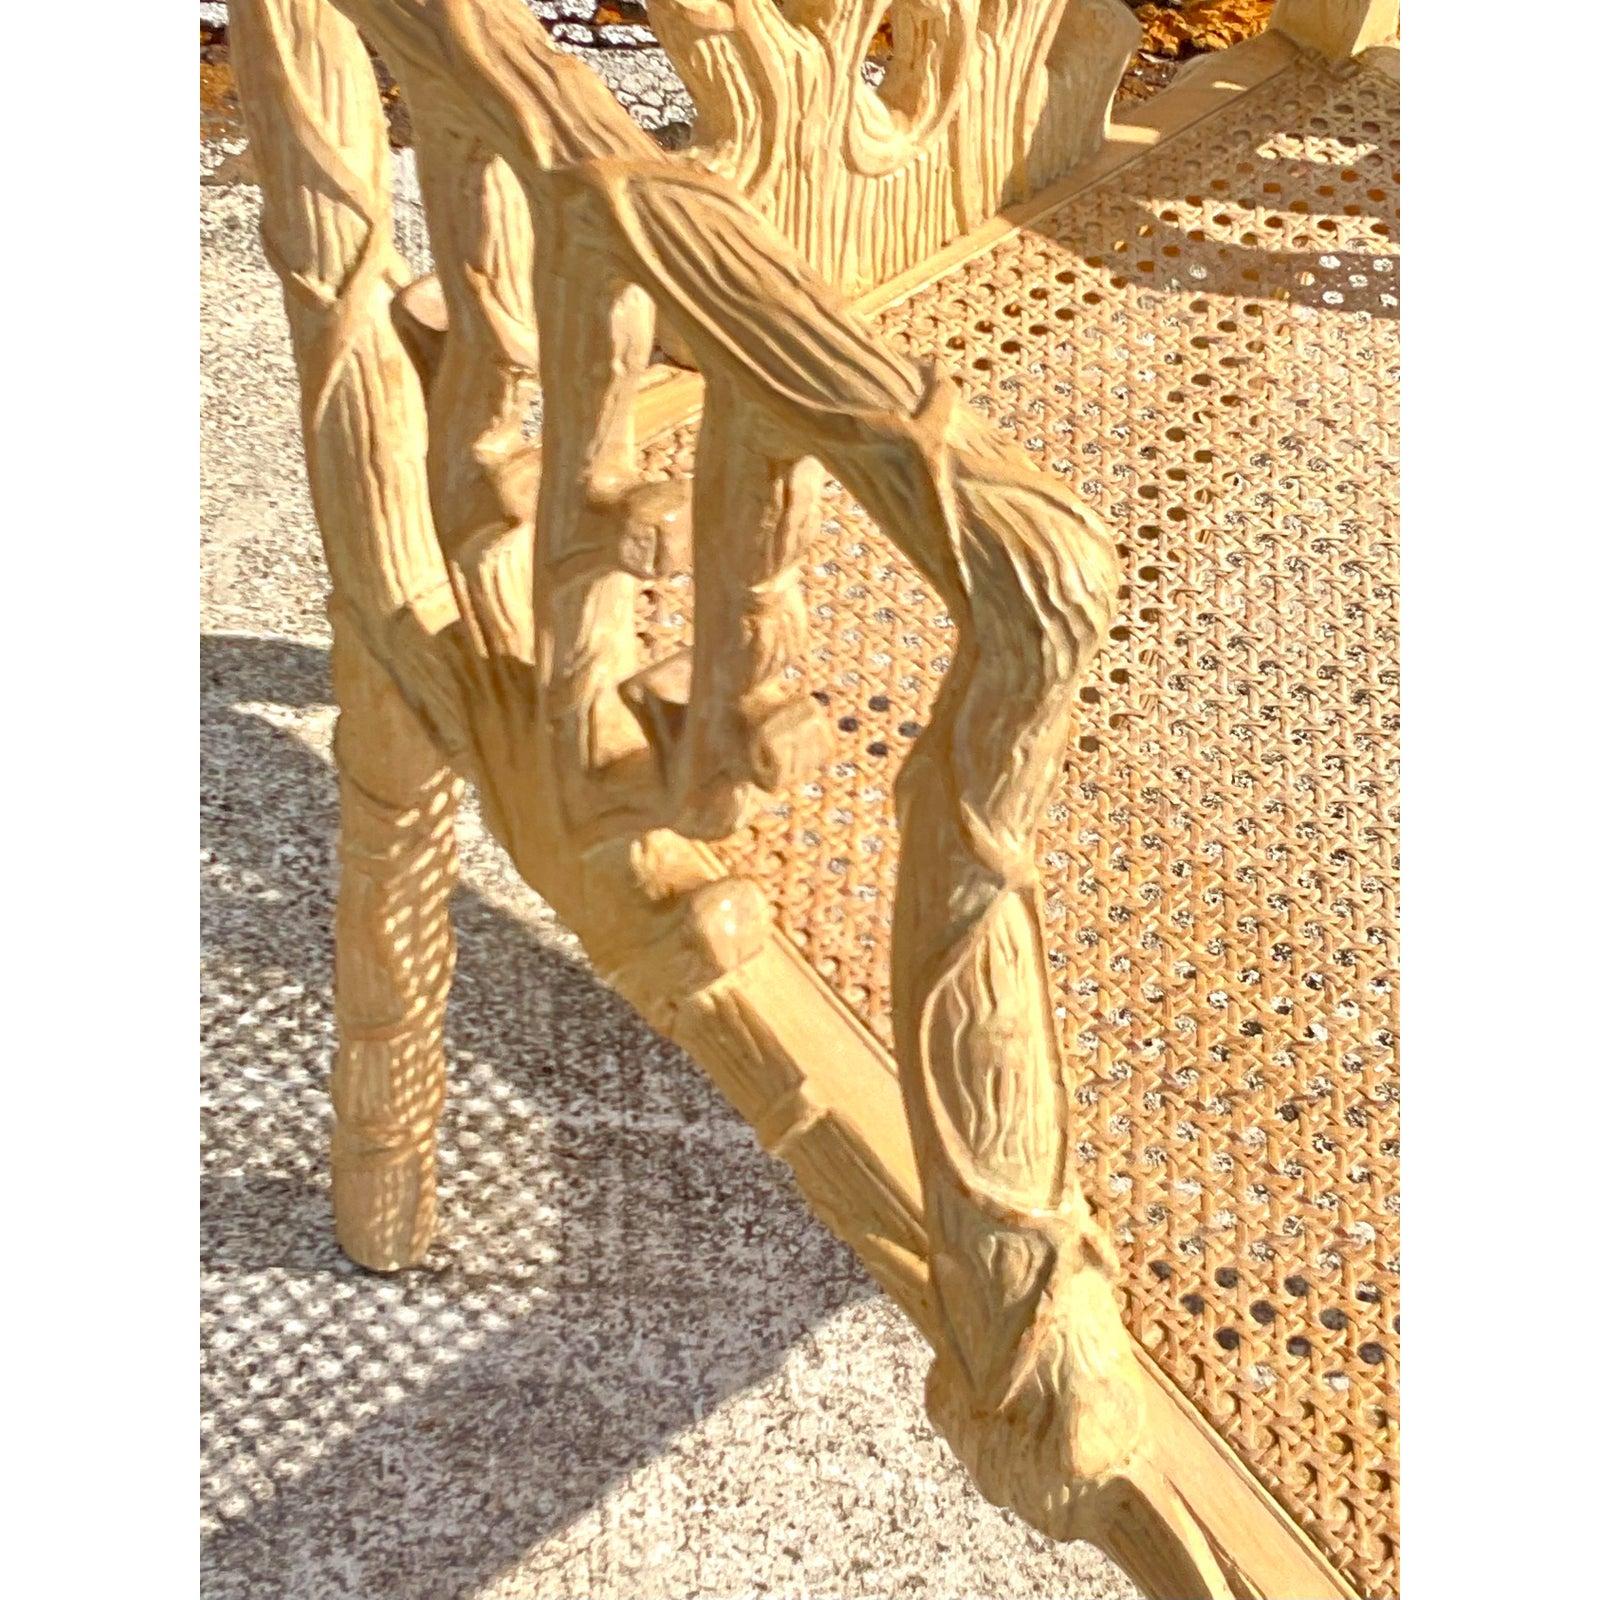 Stunning vintage Faux Bois arm chair. Gorgeous hand carved detail with a chic branches design. Cane seat adds to the glamour. Perfect as a side chair or even pulled up to a glamorous writing desk. Acquired from a Palm Beach estate.